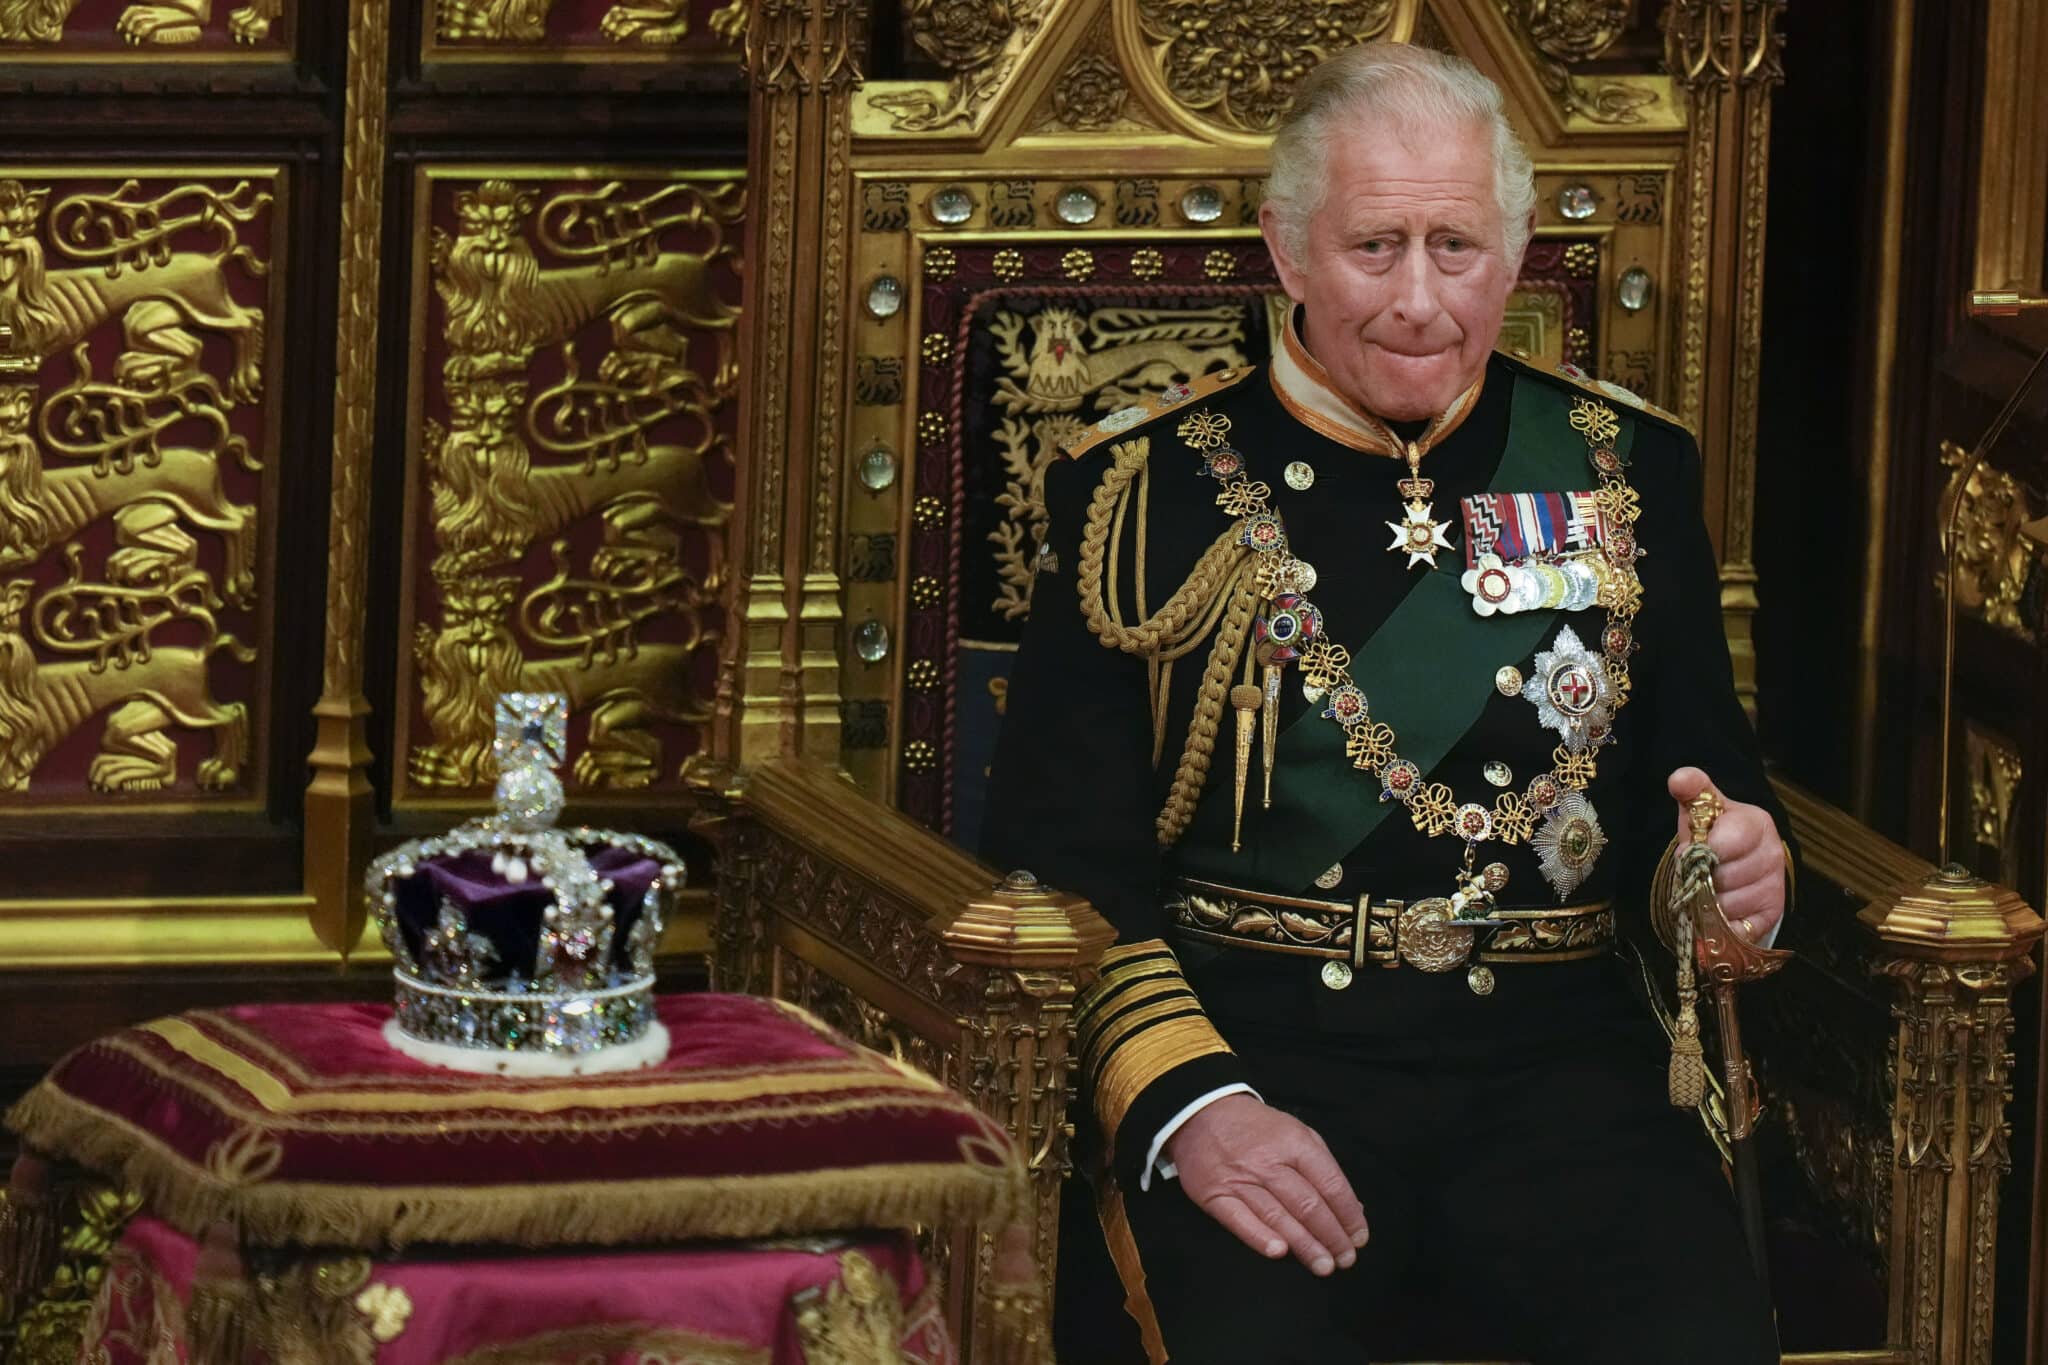 LONDON, ENGLAND - MAY 10: Prince Charles, Prince of Wales seated next to the Queen's Imperial State Crown in the House of Lords Chamber, during the State Opening of Parliament in the House of Lords at the Palace of Westminster on May 10, 2022 in London, England. The State Opening of Parliament formally marks the beginning of the new session of Parliament. It includes Queen's Speech, prepared for her to read from the throne, by her government outlining its plans for new laws being brought forward in the coming parliamentary year. This year the speech will be read by the Prince of Wales as HM The Queen will miss the event due to ongoing mobility issues. (Photo by Alastair Grant - WPA Pool/Getty Images)